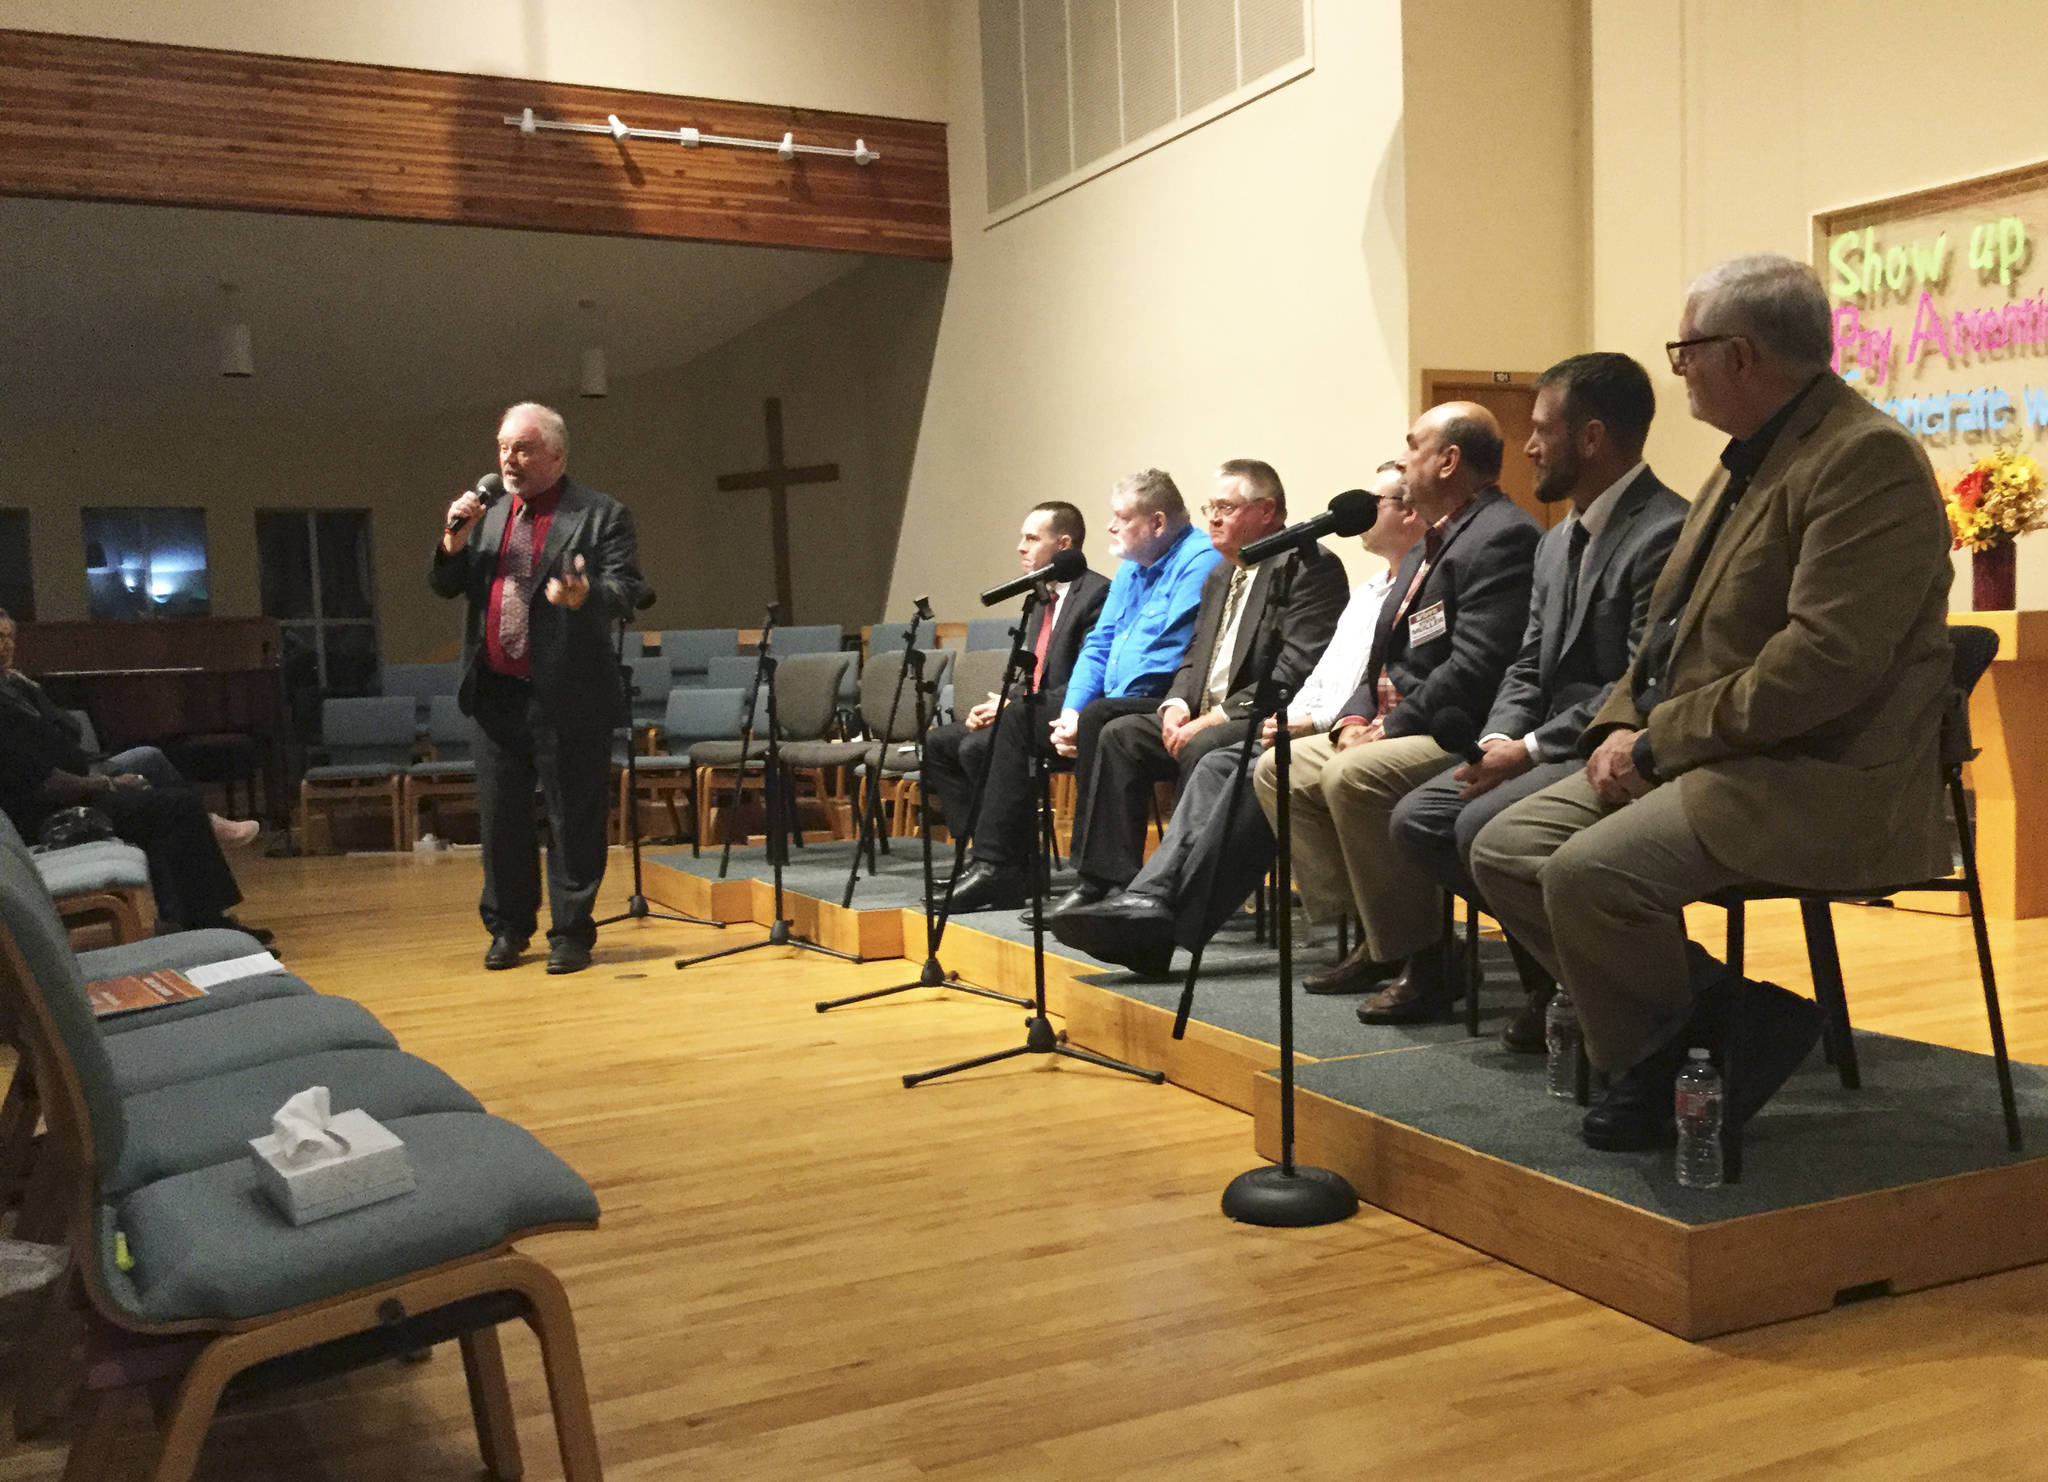 Managing Editor Steve Powell moderates a candidates forum hosted by The Marysville Globe Tuesday at Marysville United Methodist Church. Seated from left, incumbent Mayor Jon Nehring and challenger Mike Patrick; City Council Pos. 5 candidates Kelly Richards and Jeff Seibert; City Councilman Steve Muller; and school board candidates in separate races, Paul Galovin and incumbent Tom Albright.